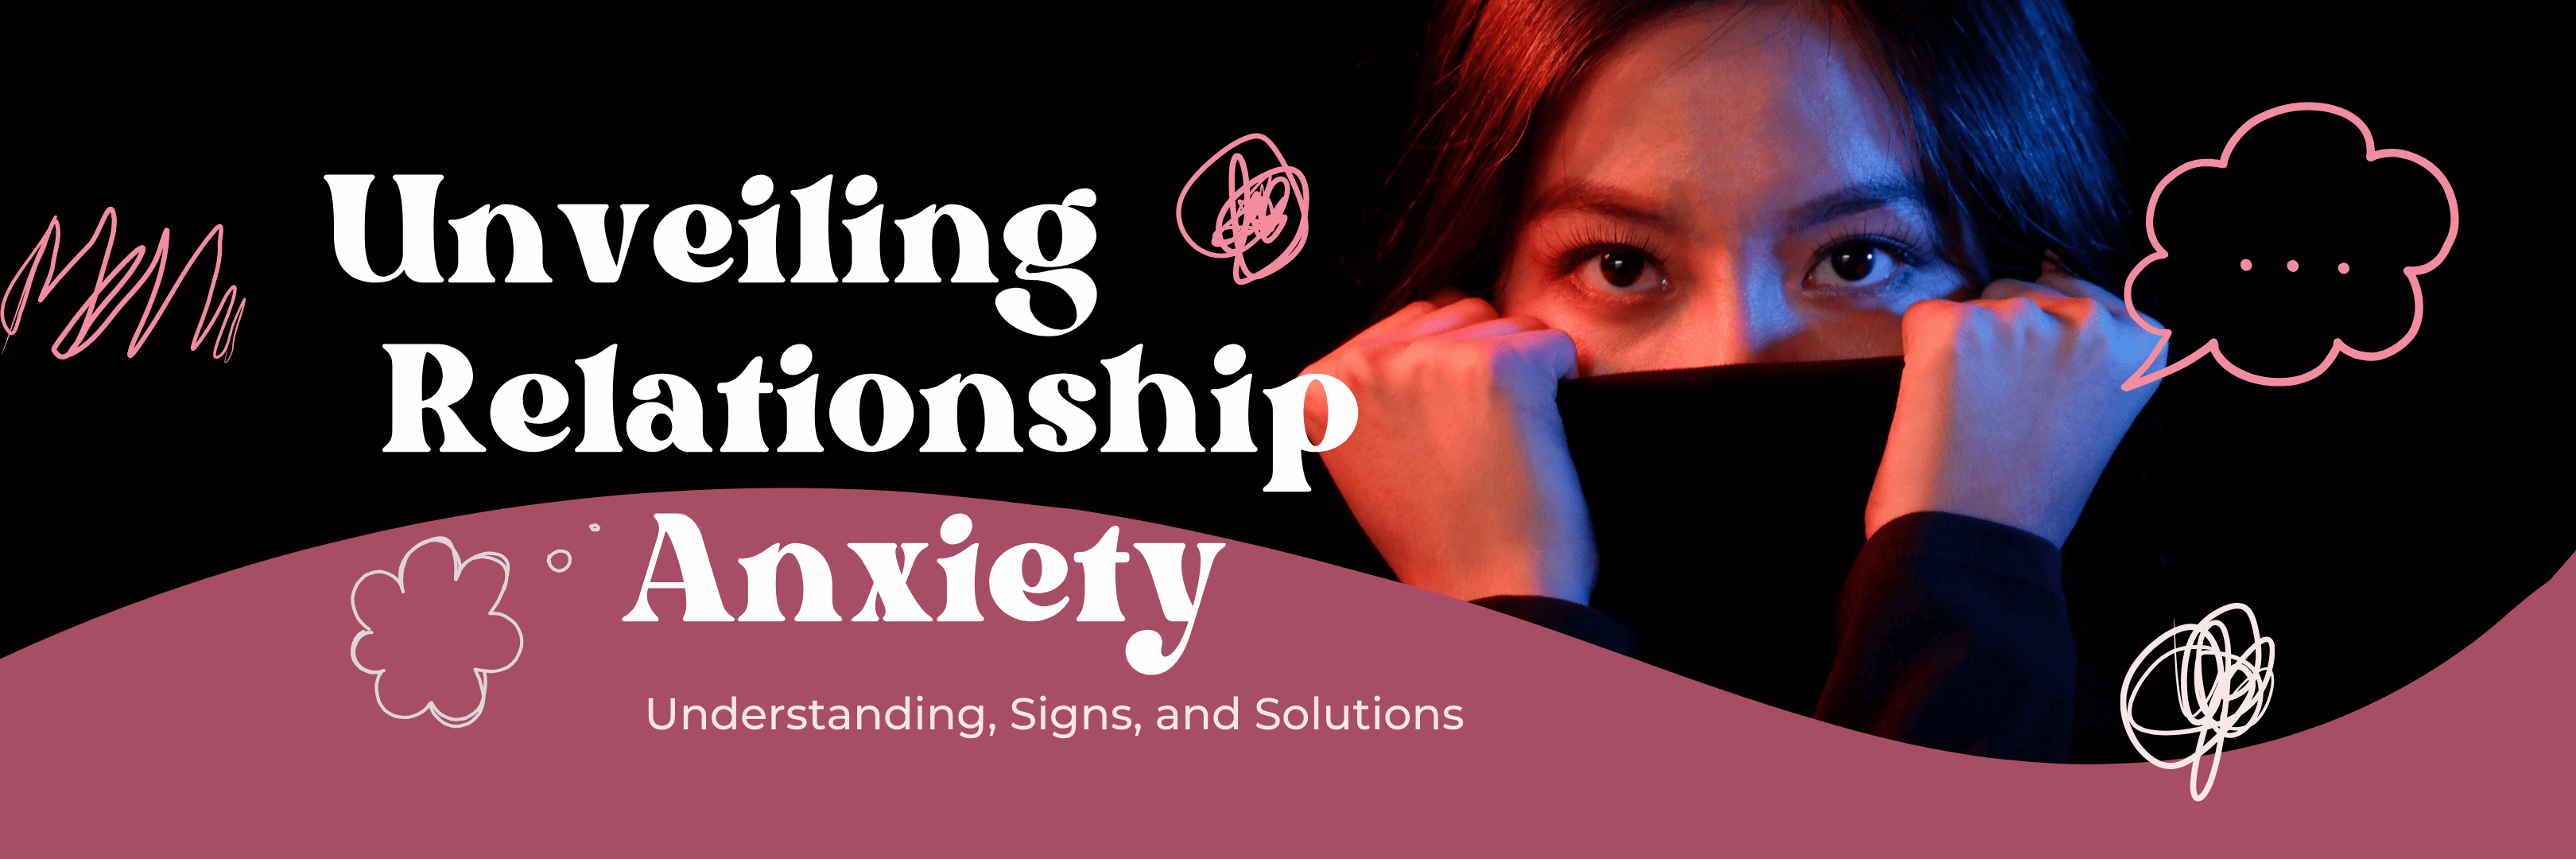 relationship anxiety web banner